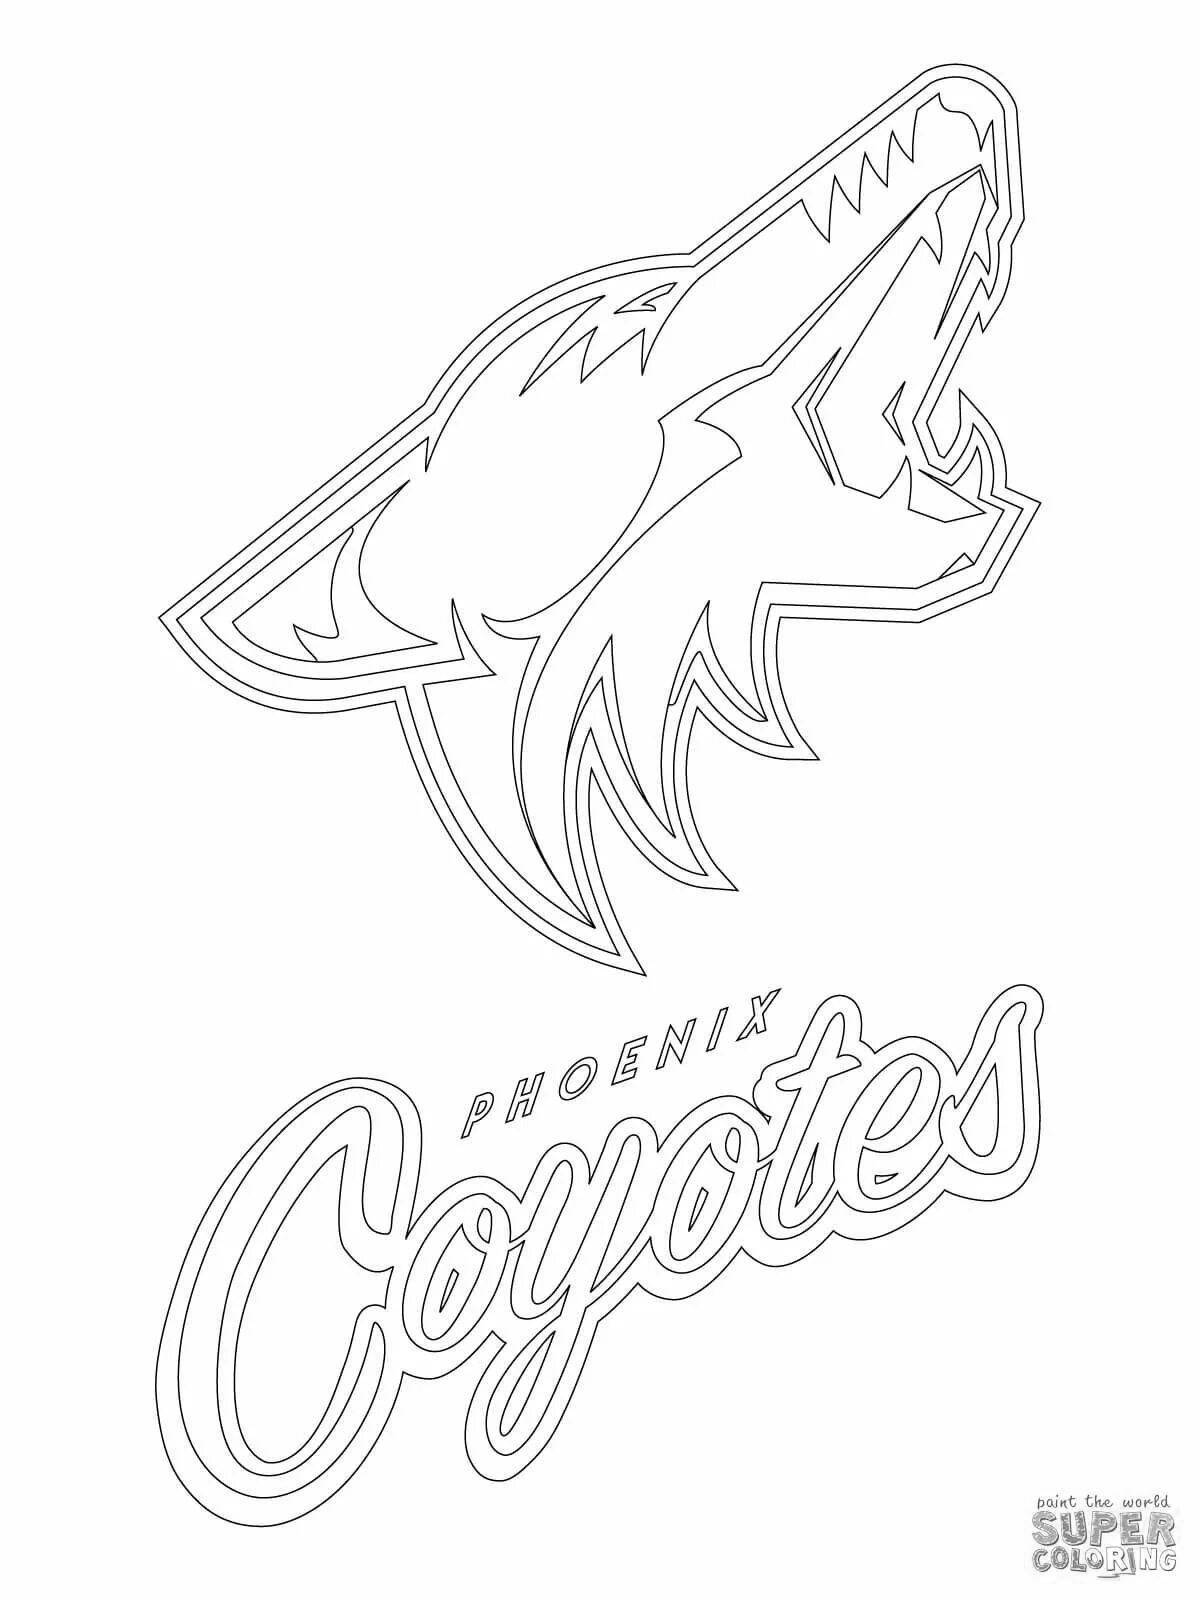 Live hockey nhl coloring book